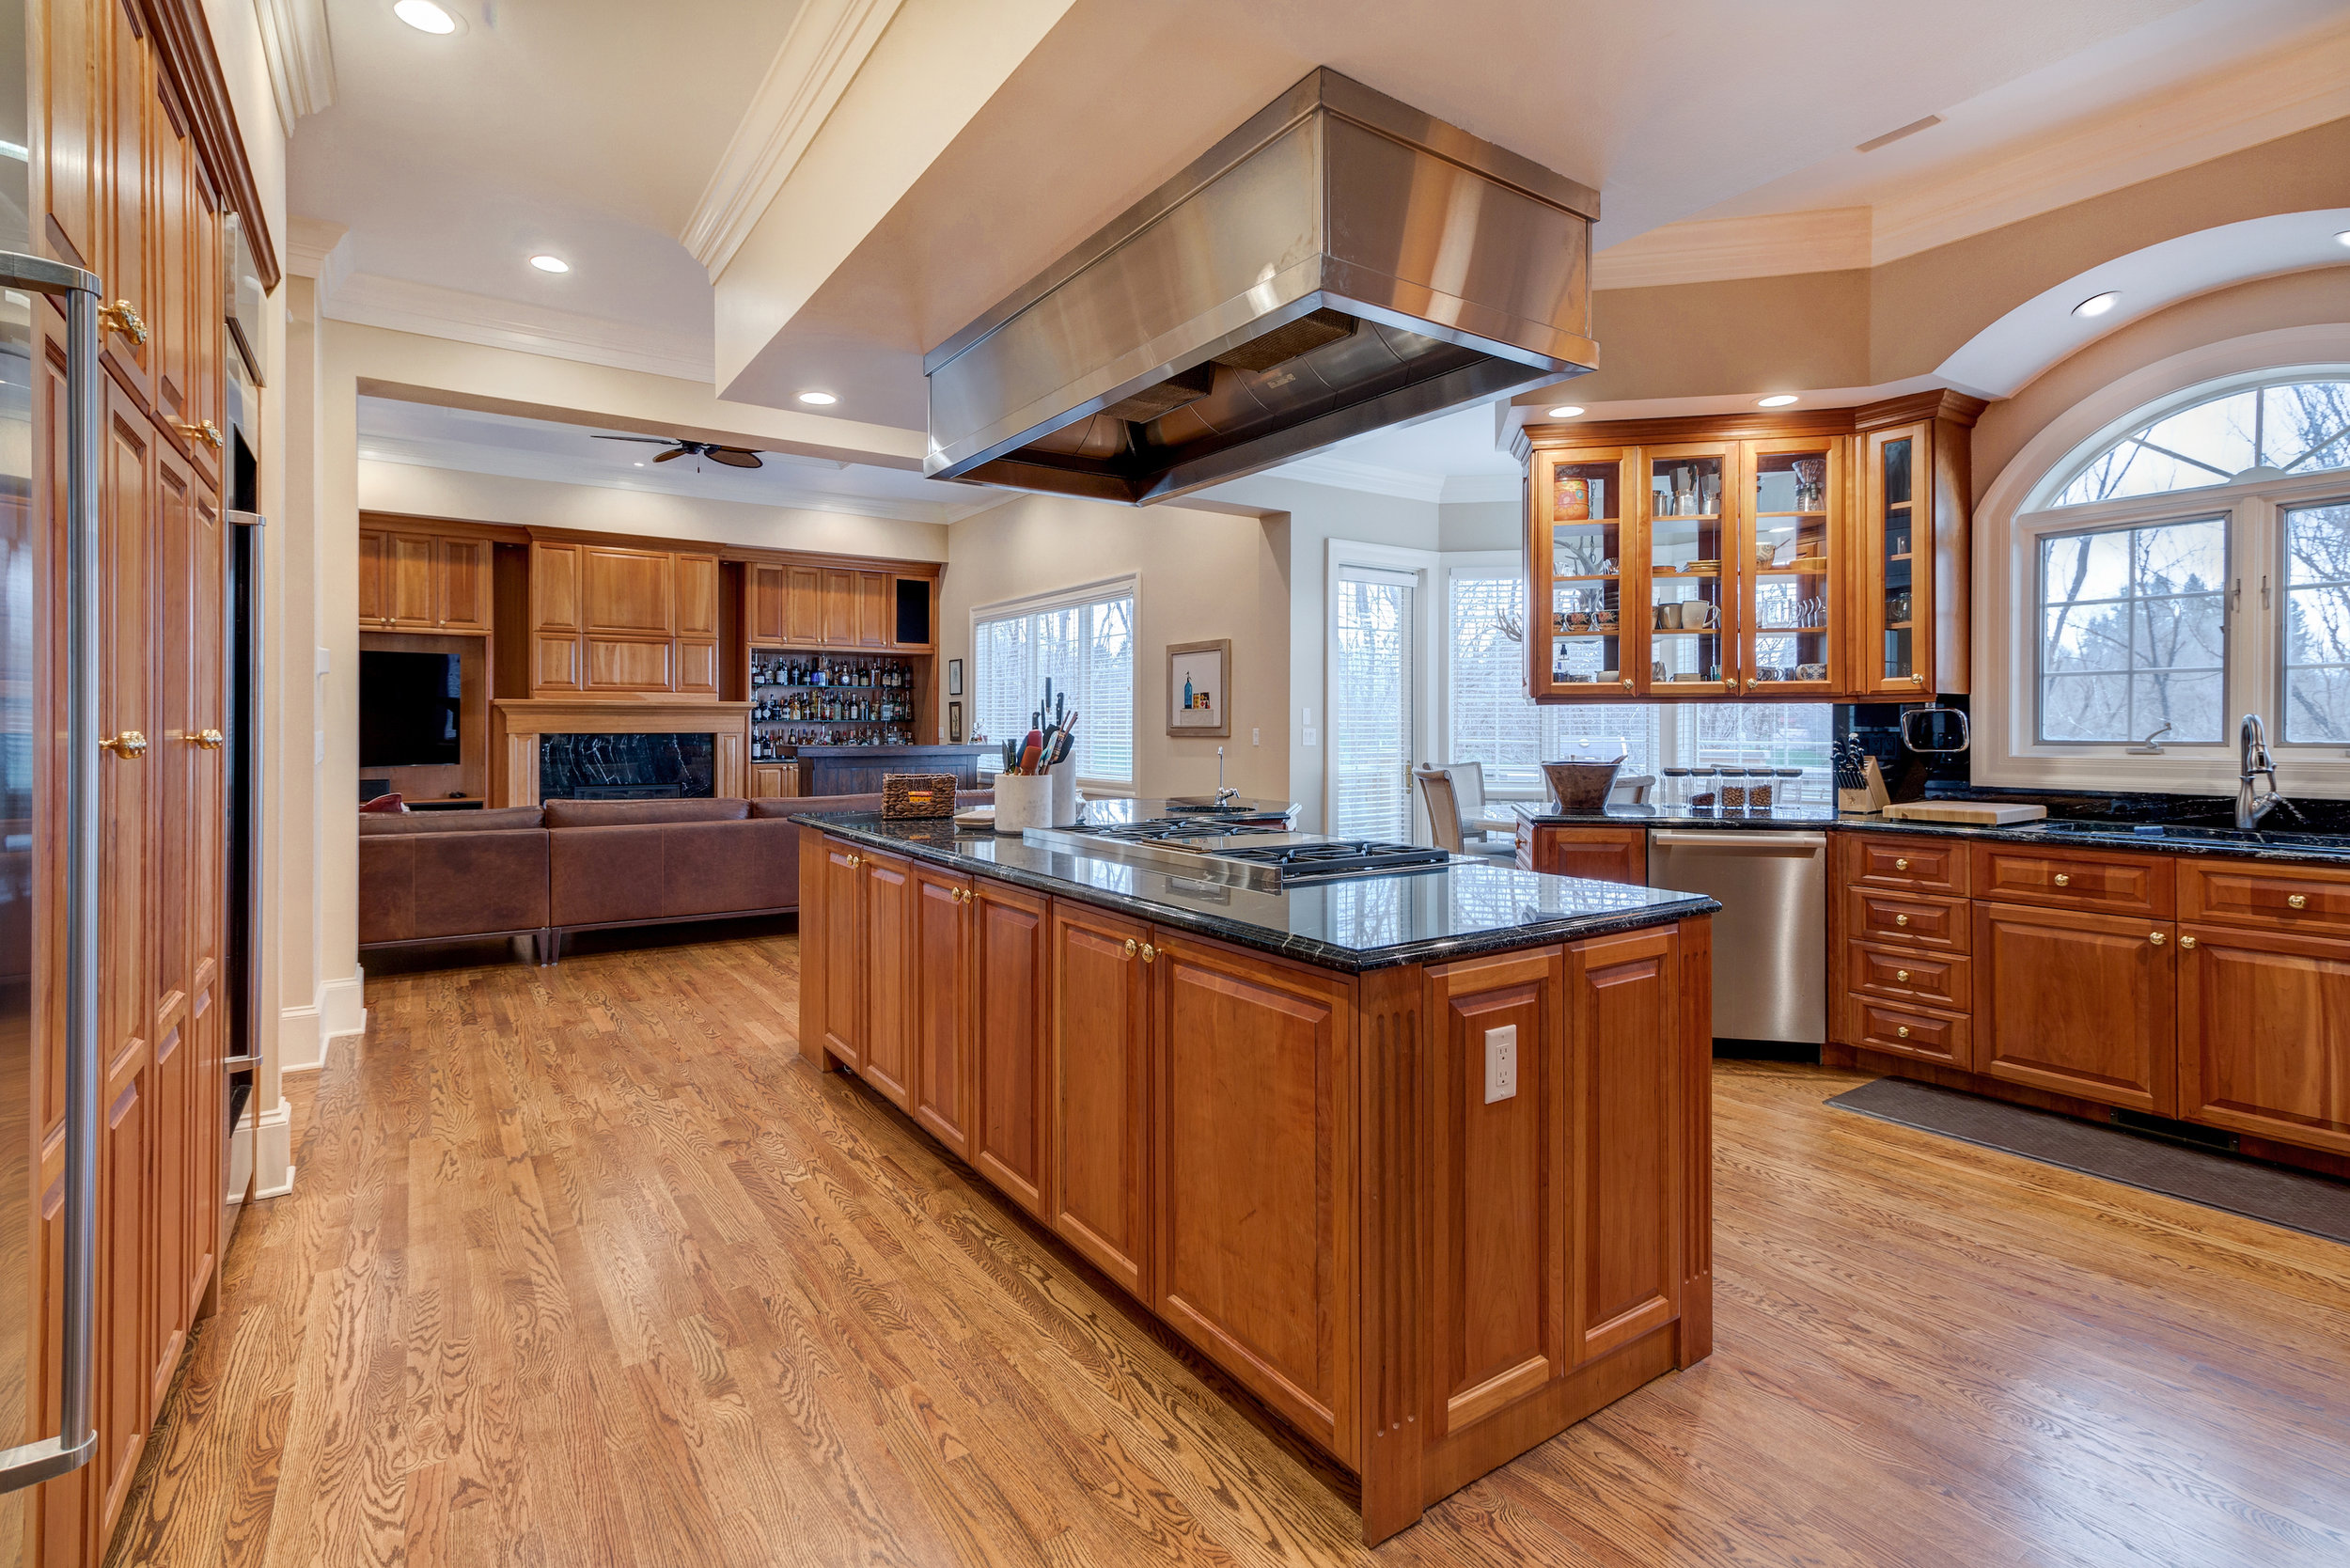 10-Kitchen with family room beyond.jpg